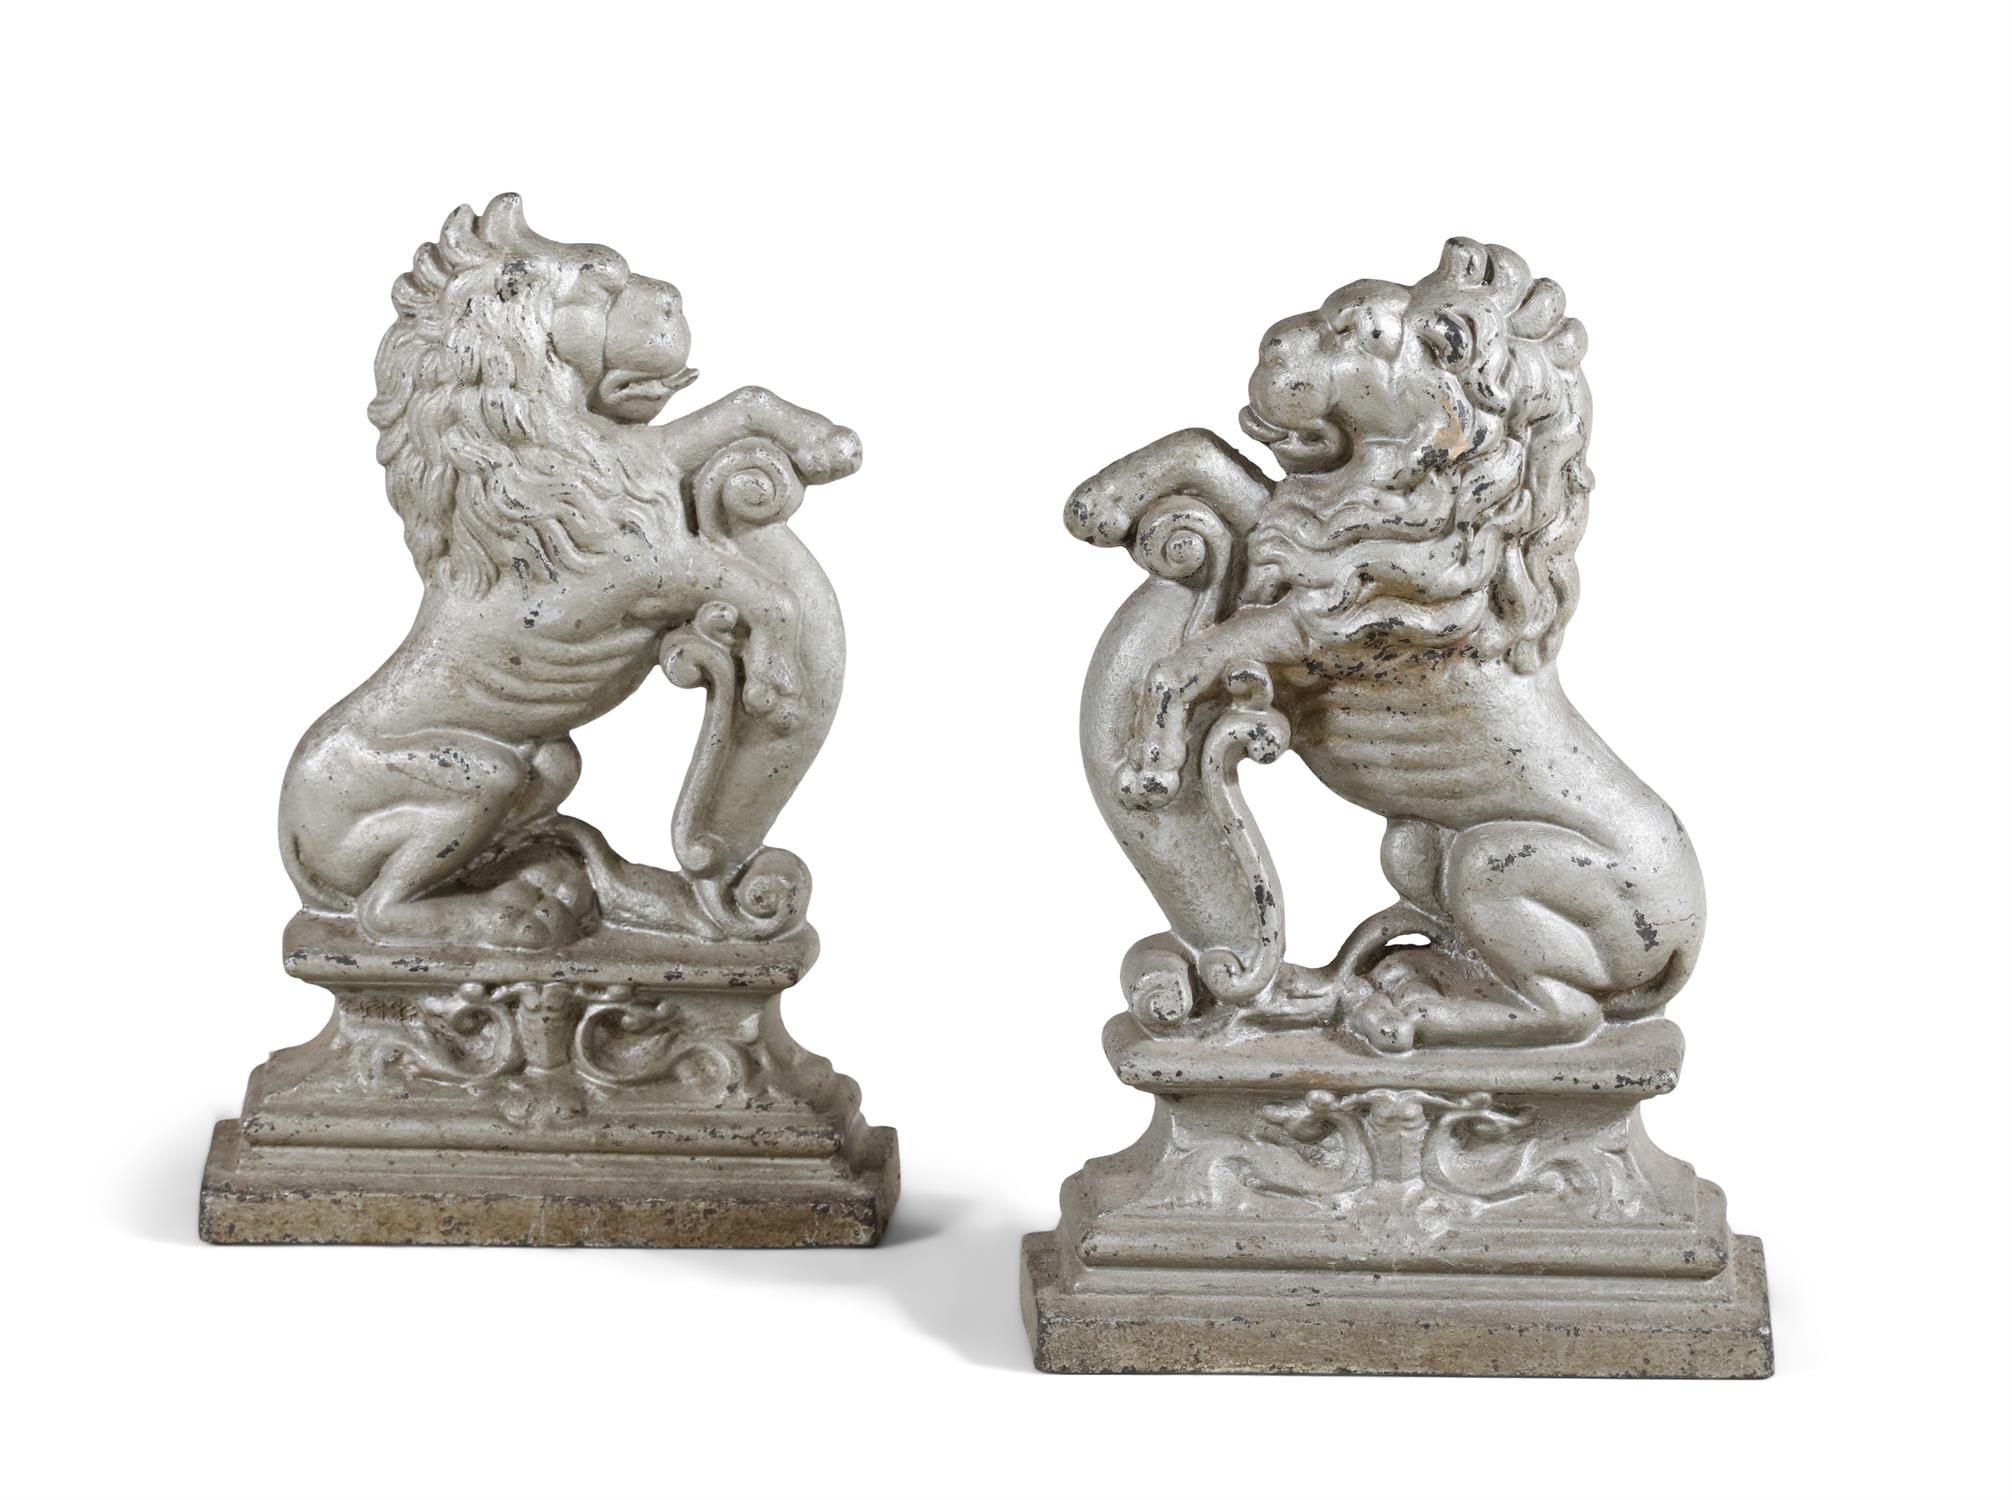 A PAIR OF 19TH CENTURY CAST IRON DOOR STOPS, painted in 'off white' and modelled as lions rampant